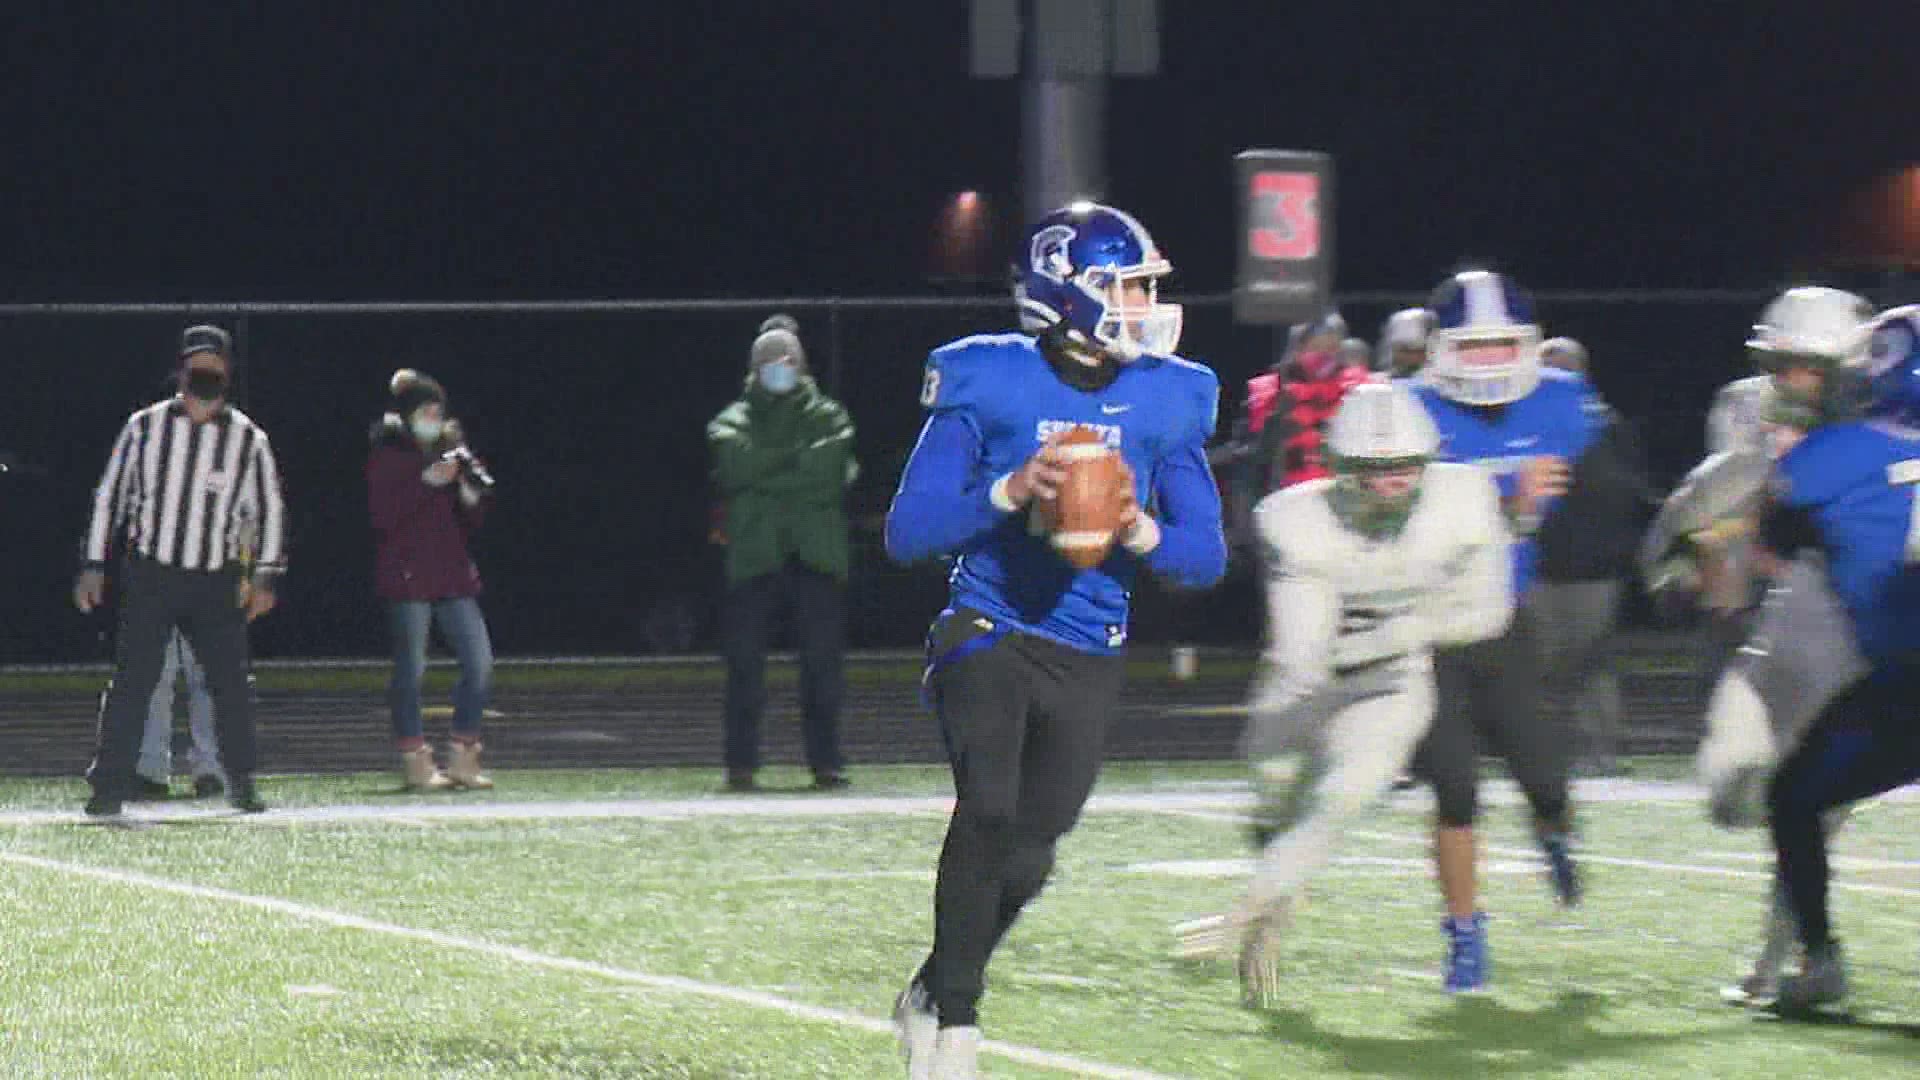 Highlights from Coopersville vs. Sparta in Division 4 playoff action.